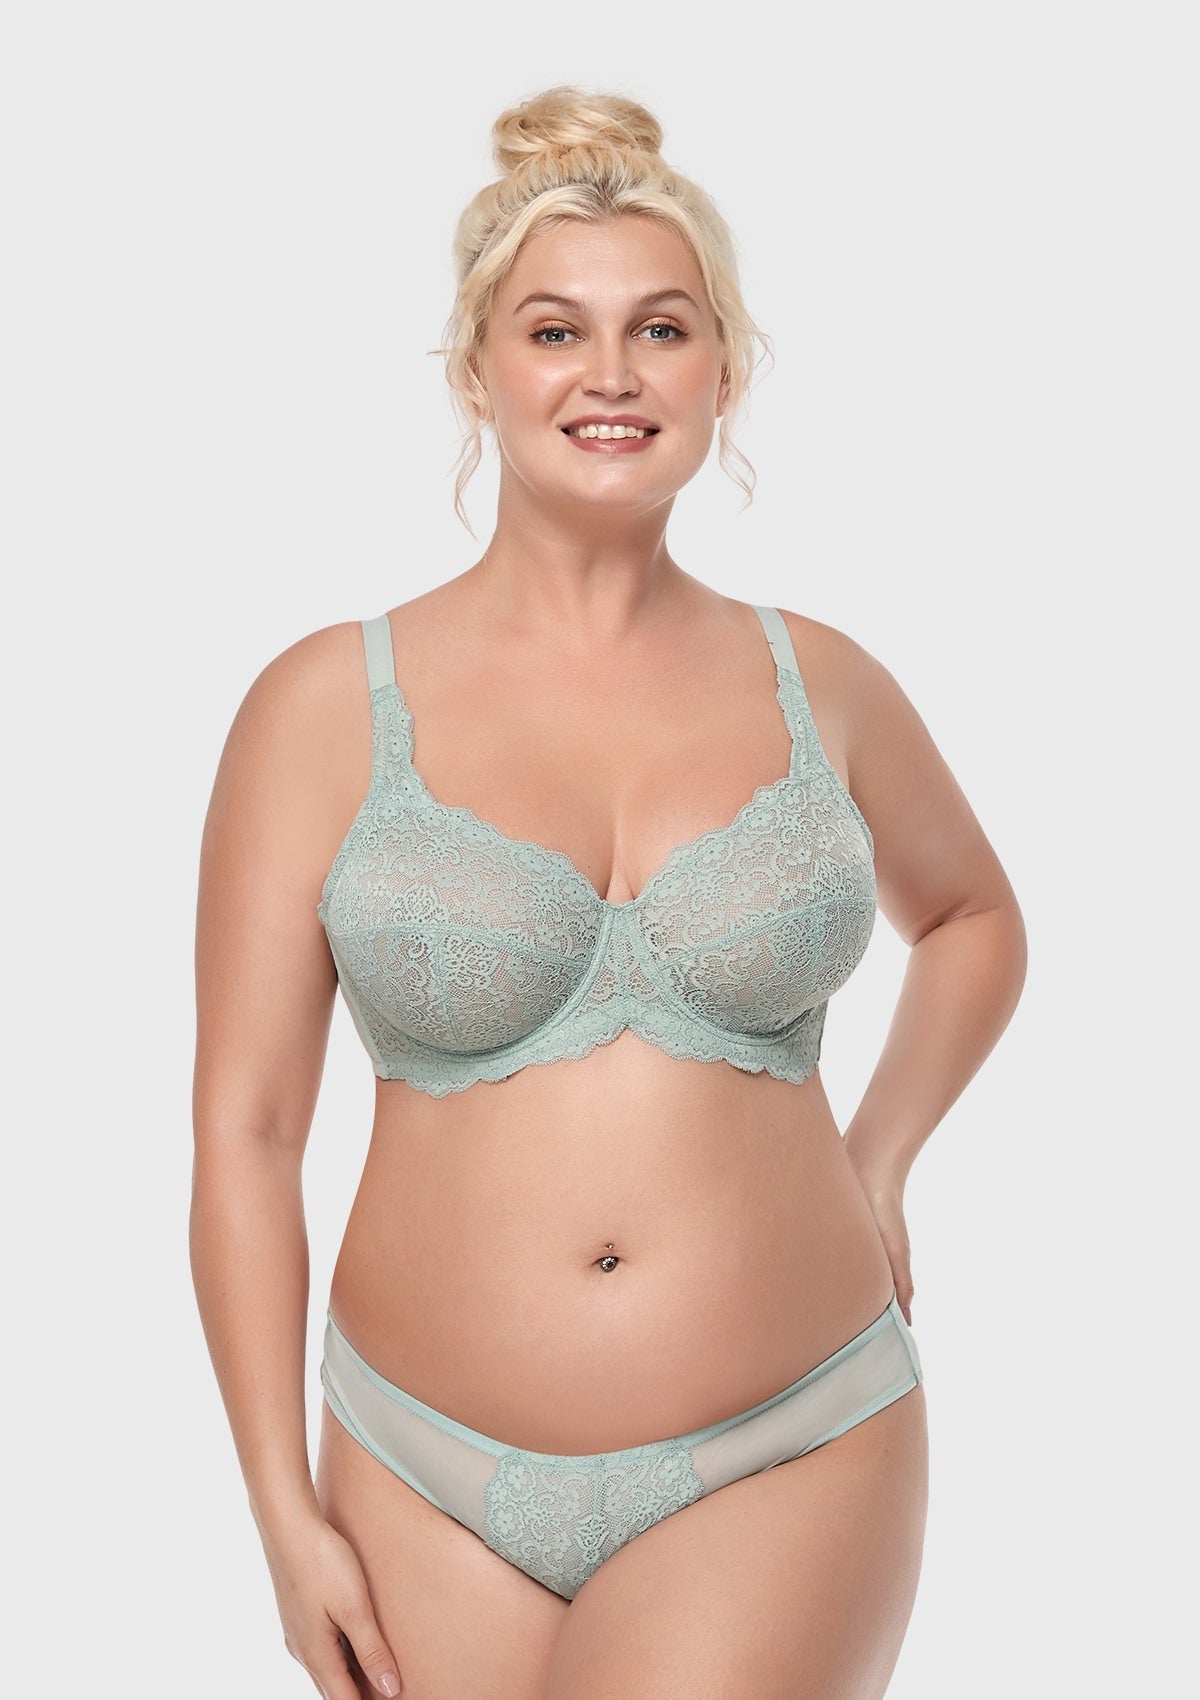 HSIA All-Over Floral Lace: Best Bra For Elderly With Sagging Breasts - Crystal Blue / 36 / D